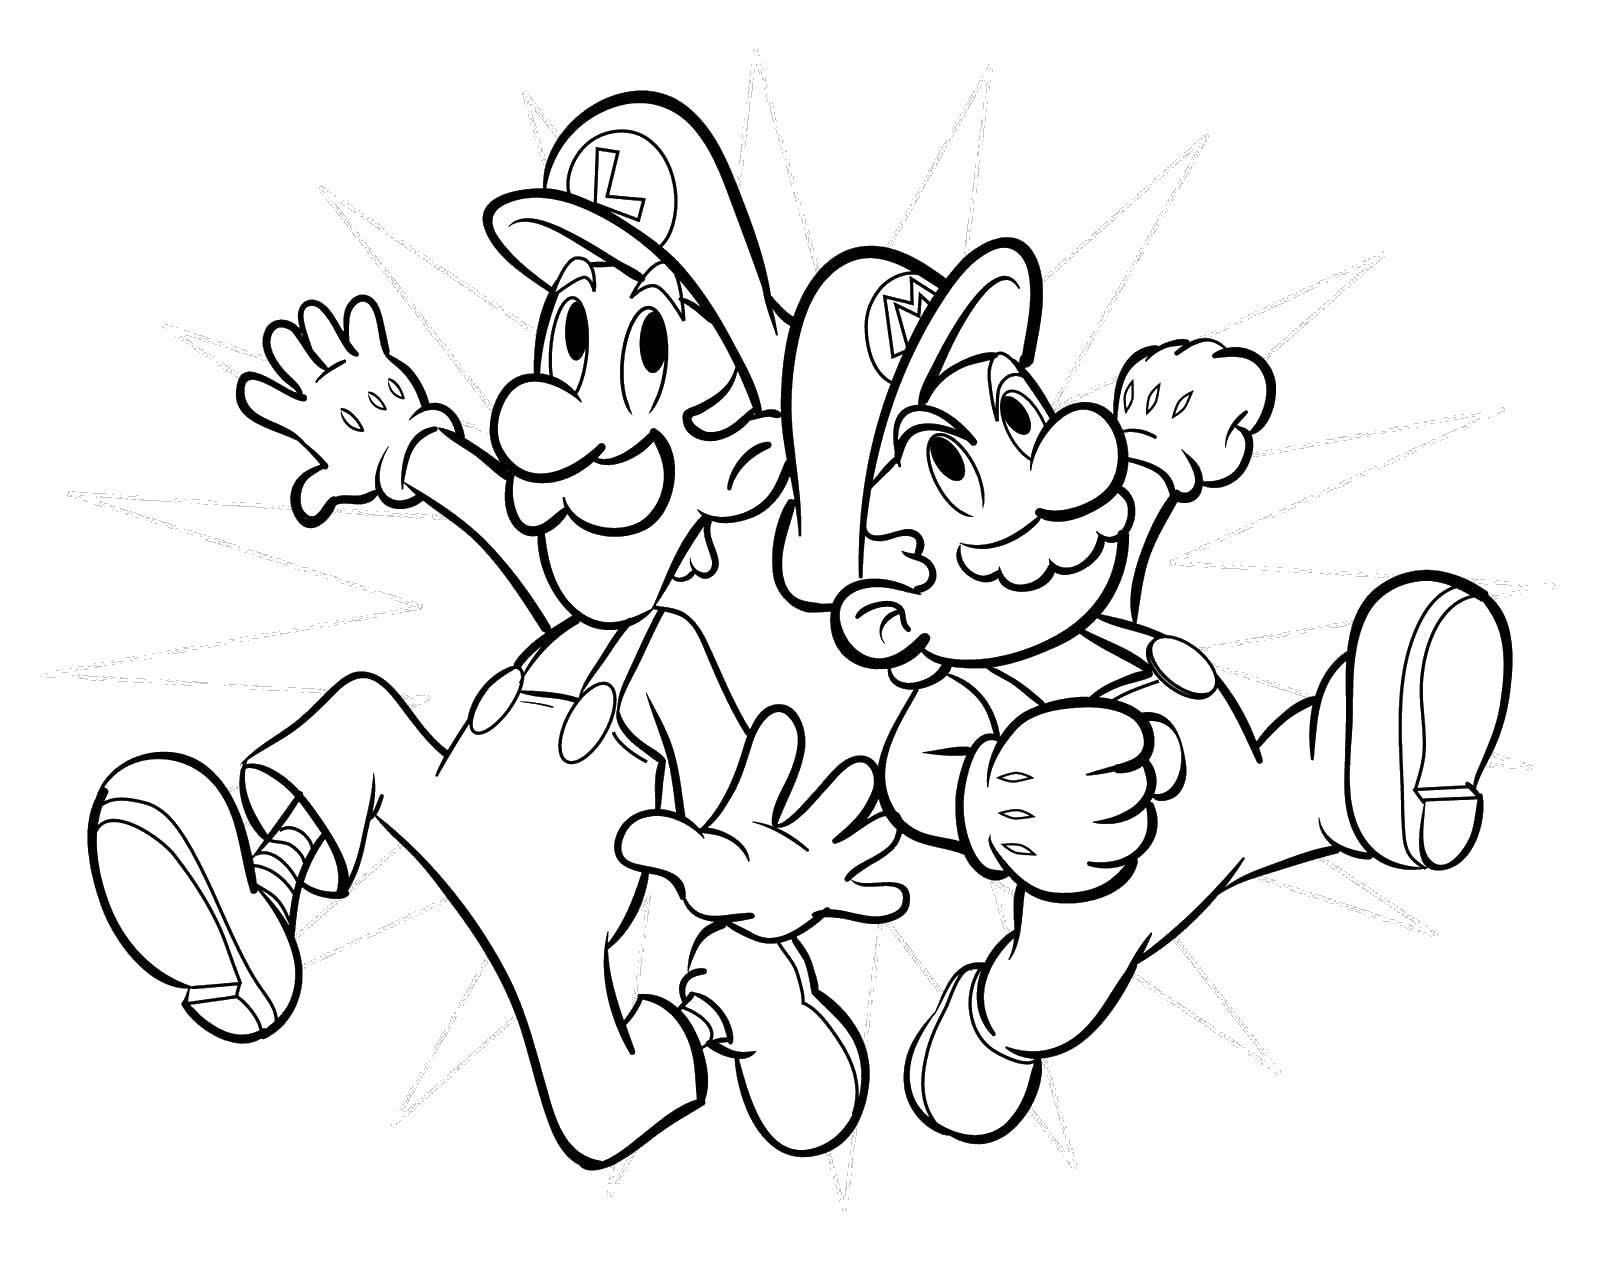 Coloring Mario and Luigi. Category The character from the game. Tags:  Games, Mario.